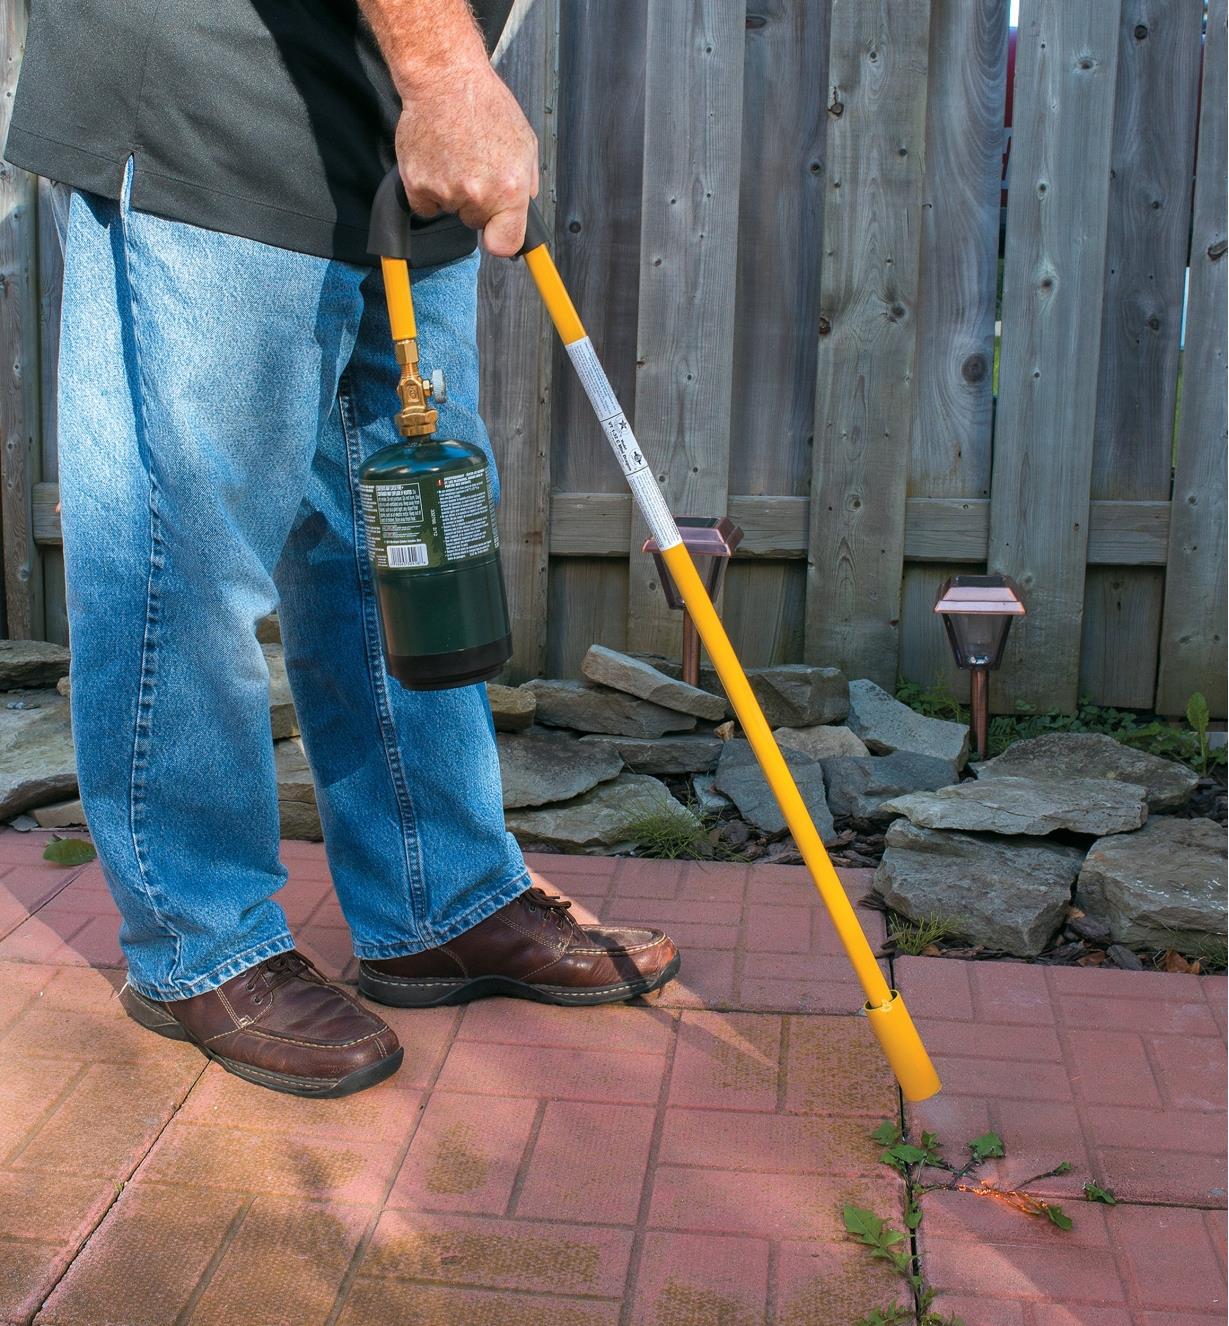 A man uses a Mini Weed Torch to remove weeds from a patio